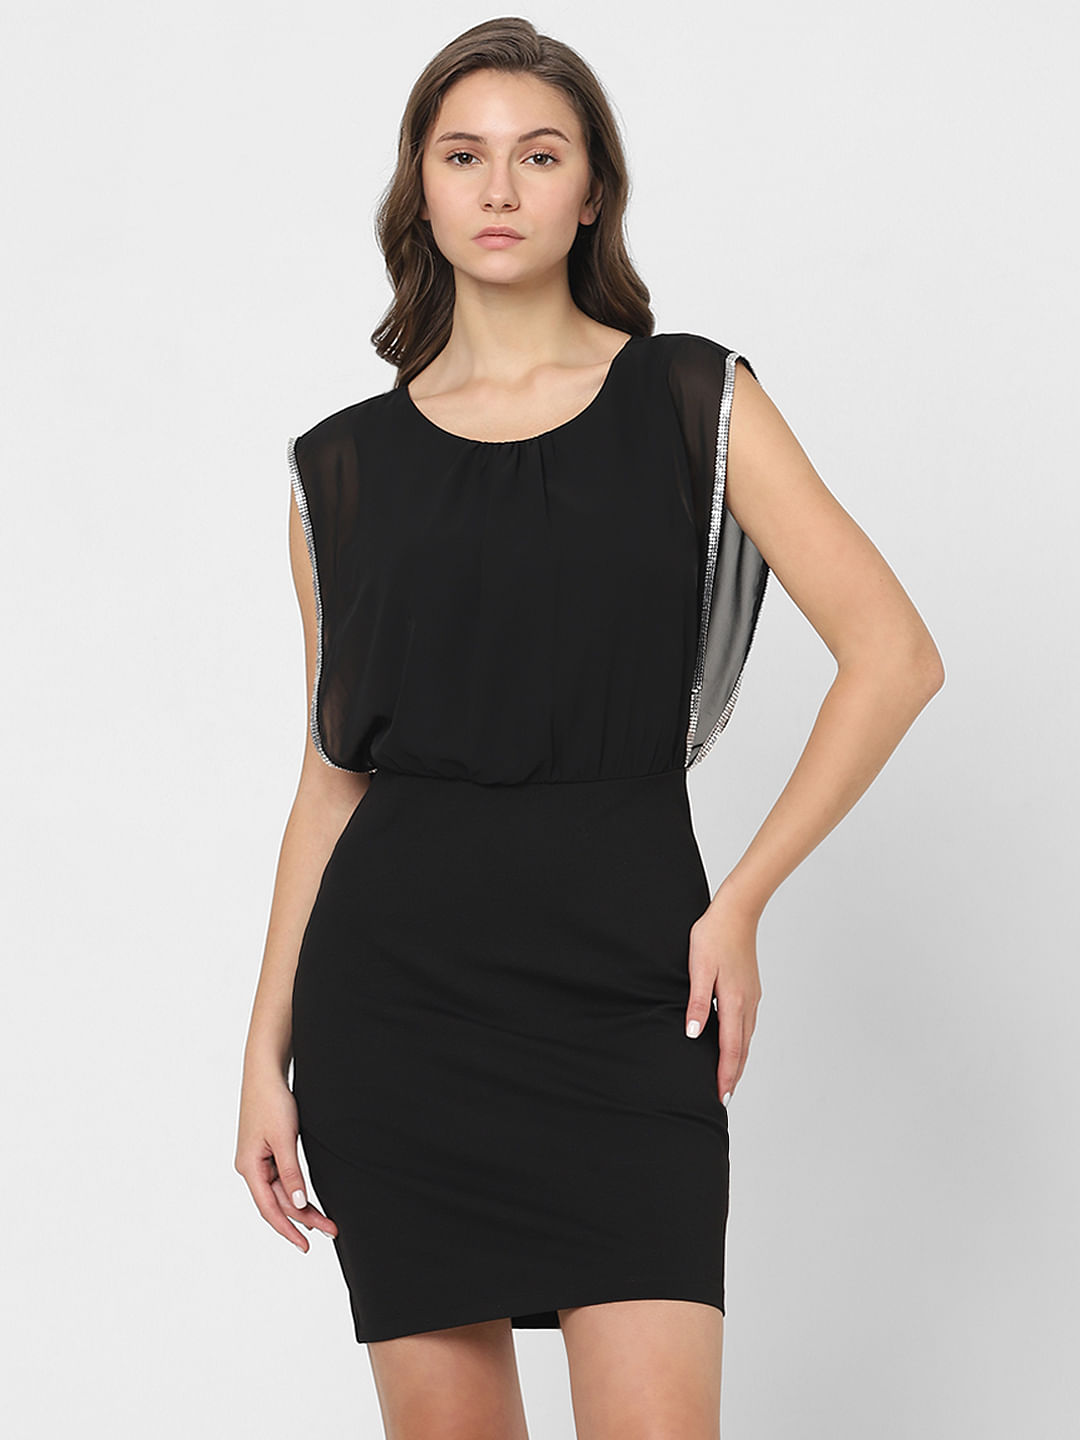 Cossac Black Fitted Long Sleeve Dress | Lulus Fashion Flair